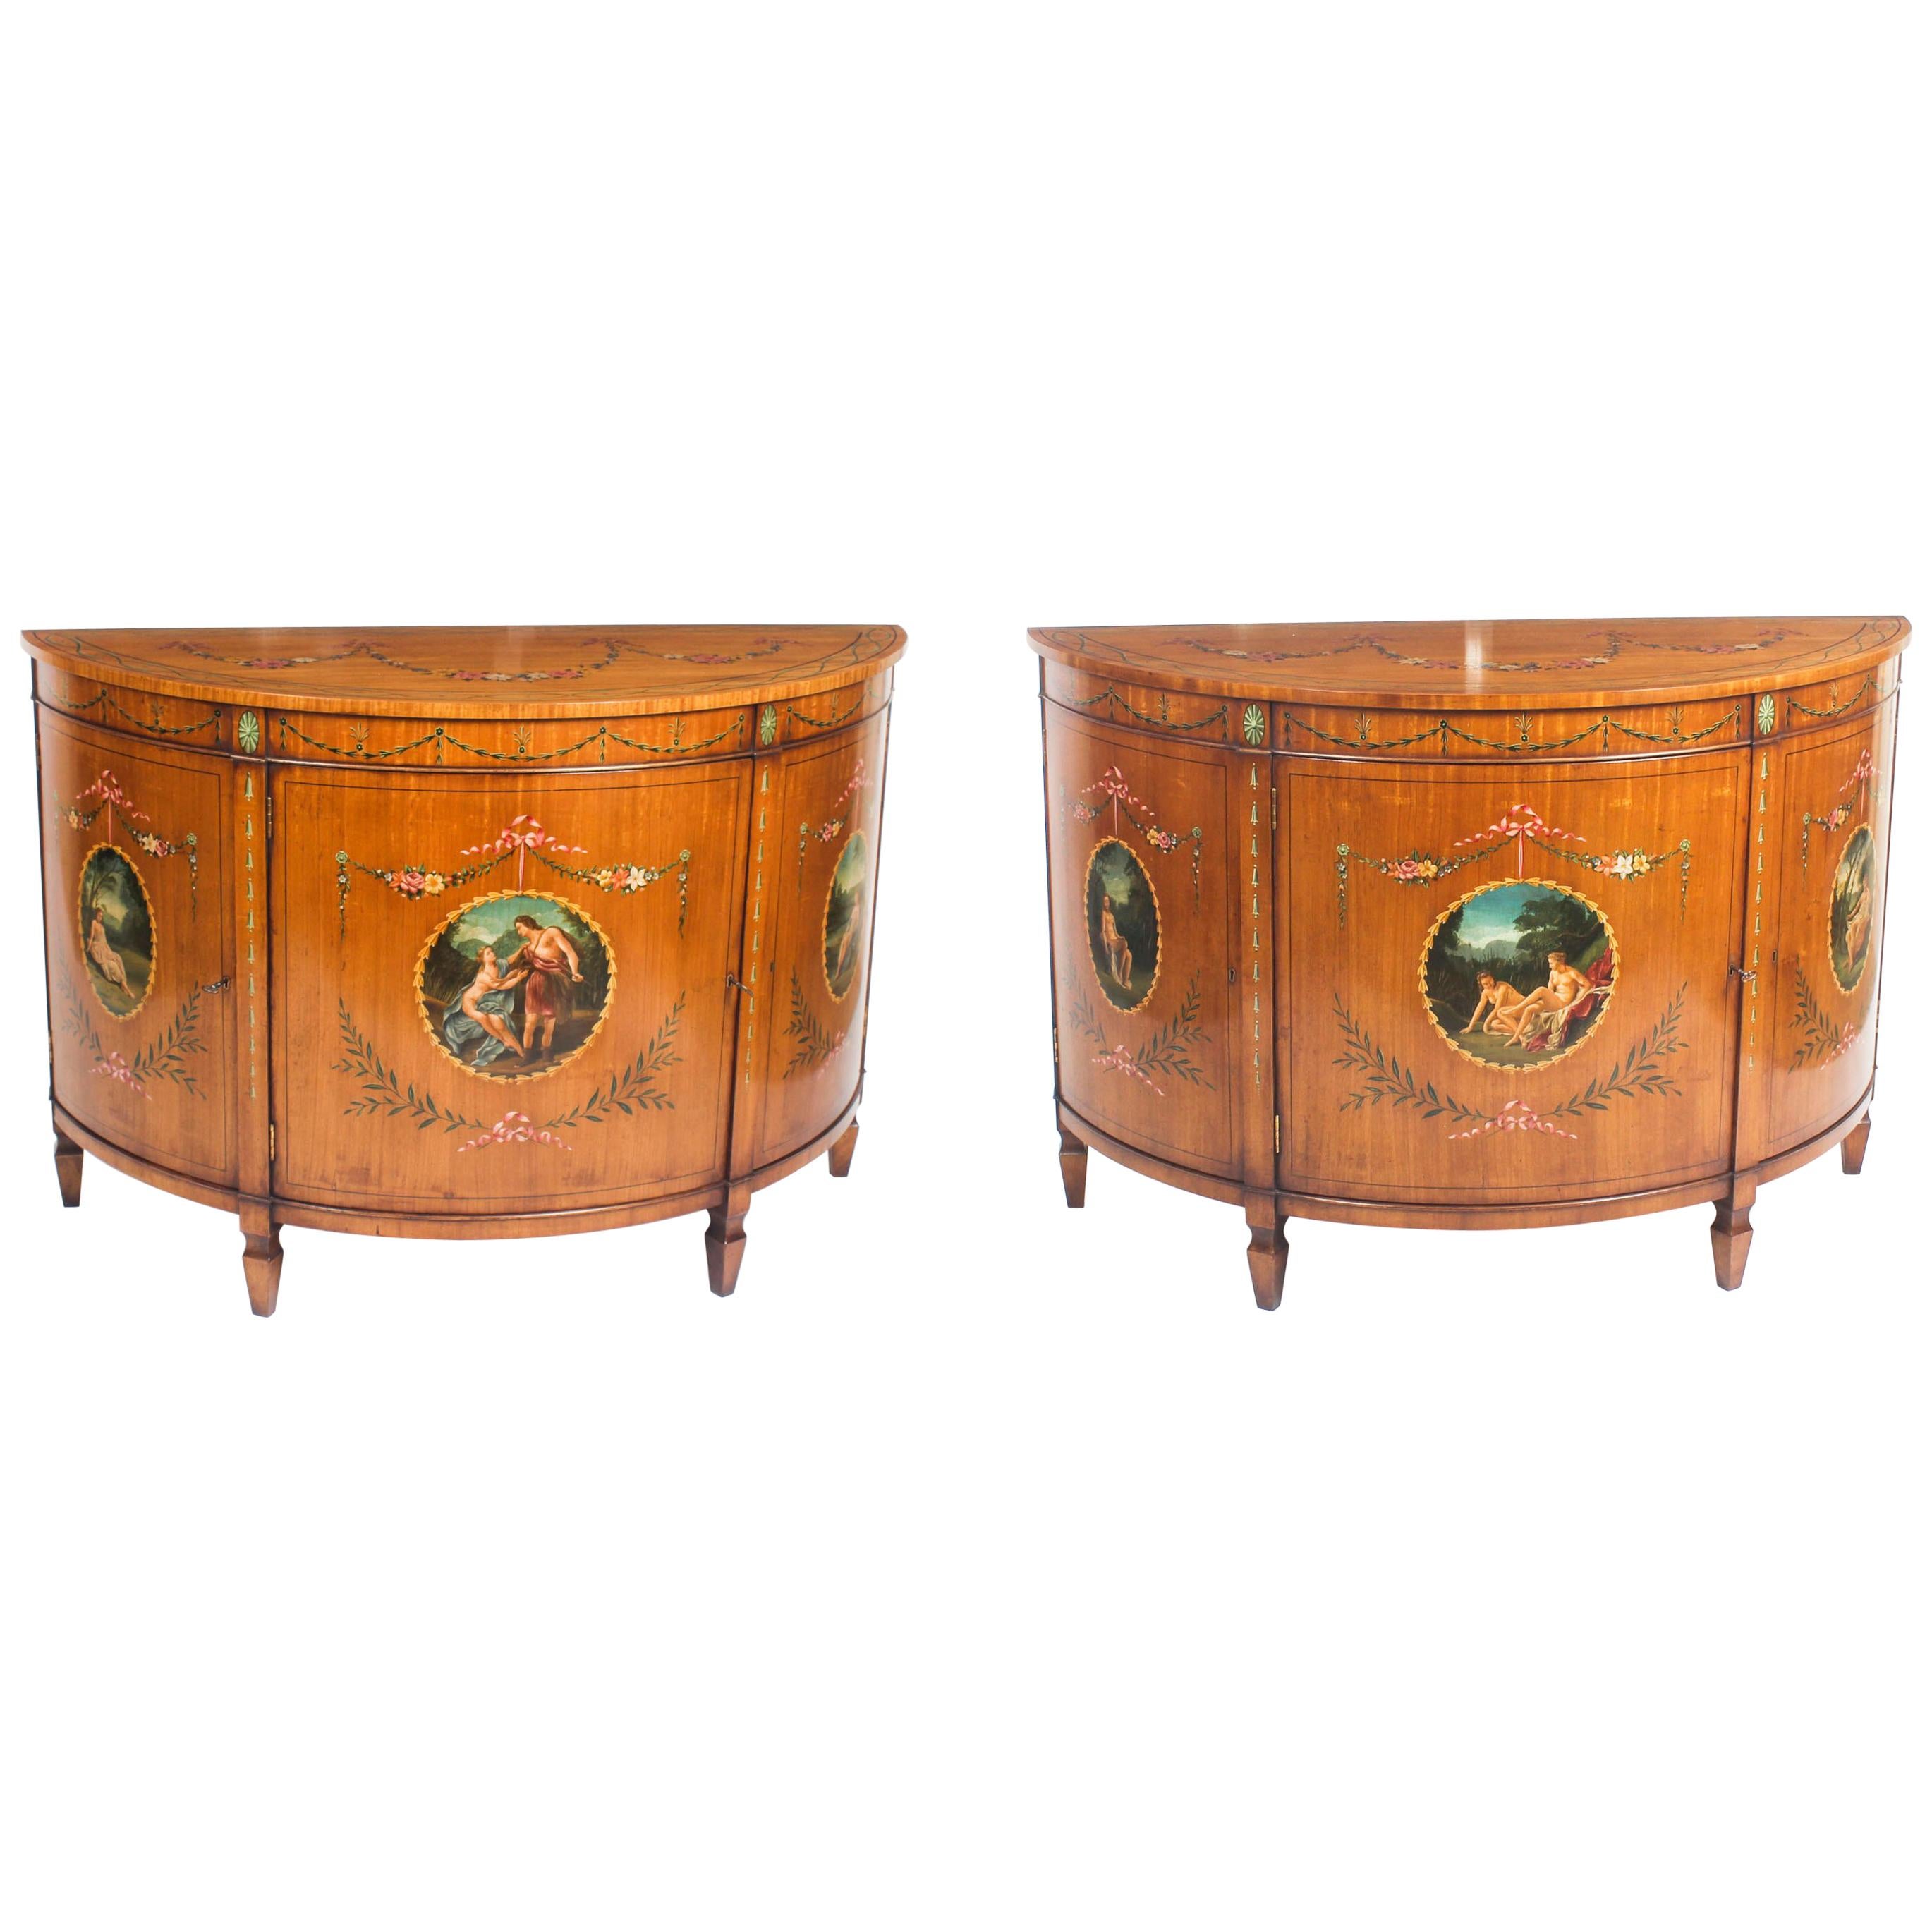 Antique Pair of Adam Revival Satinwood Side Cabinets Commodes, 19th Century